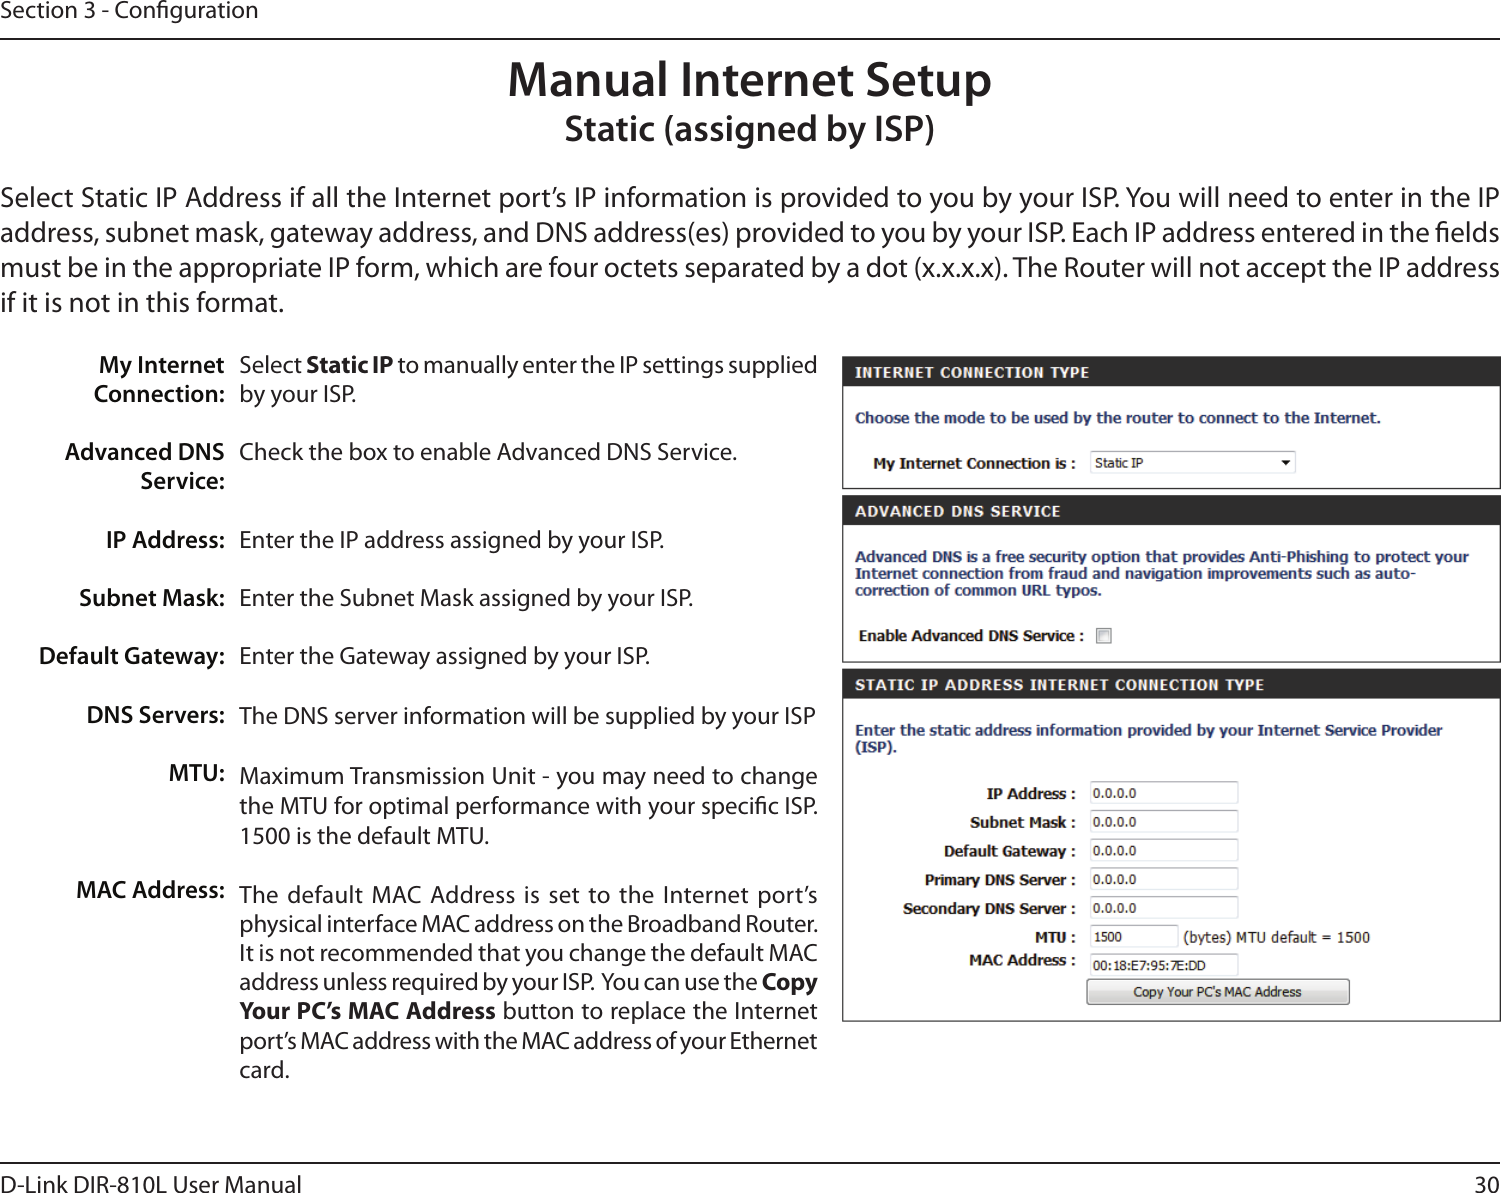 30D-Link DIR-810L User ManualSection 3 - CongurationSelect Static IP to manually enter the IP settings supplied by your ISP.Check the box to enable Advanced DNS Service.Enter the IP address assigned by your ISP.Enter the Subnet Mask assigned by your ISP.Enter the Gateway assigned by your ISP.The DNS server information will be supplied by your ISP Maximum Transmission Unit - you may need to change the MTU for optimal performance with your specic ISP. 1500 is the default MTU.The  default MAC  Address  is  set  to the  Internet  port’s physical interface MAC address on the Broadband Router. It is not recommended that you change the default MAC address unless required by your ISP.  You can use the Copy Your PC’s MAC Address button to replace the Internet port’s MAC address with the MAC address of your Ethernet card.My Internet Connection:Advanced DNS Service:IP Address:Subnet Mask:Default Gateway:DNS Servers:MTU:MAC Address:Manual Internet SetupStatic (assigned by ISP)Select Static IP Address if all the Internet port’s IP information is provided to you by your ISP. You will need to enter in the IP address, subnet mask, gateway address, and DNS address(es) provided to you by your ISP. Each IP address entered in the elds must be in the appropriate IP form, which are four octets separated by a dot (x.x.x.x). The Router will not accept the IP address if it is not in this format.